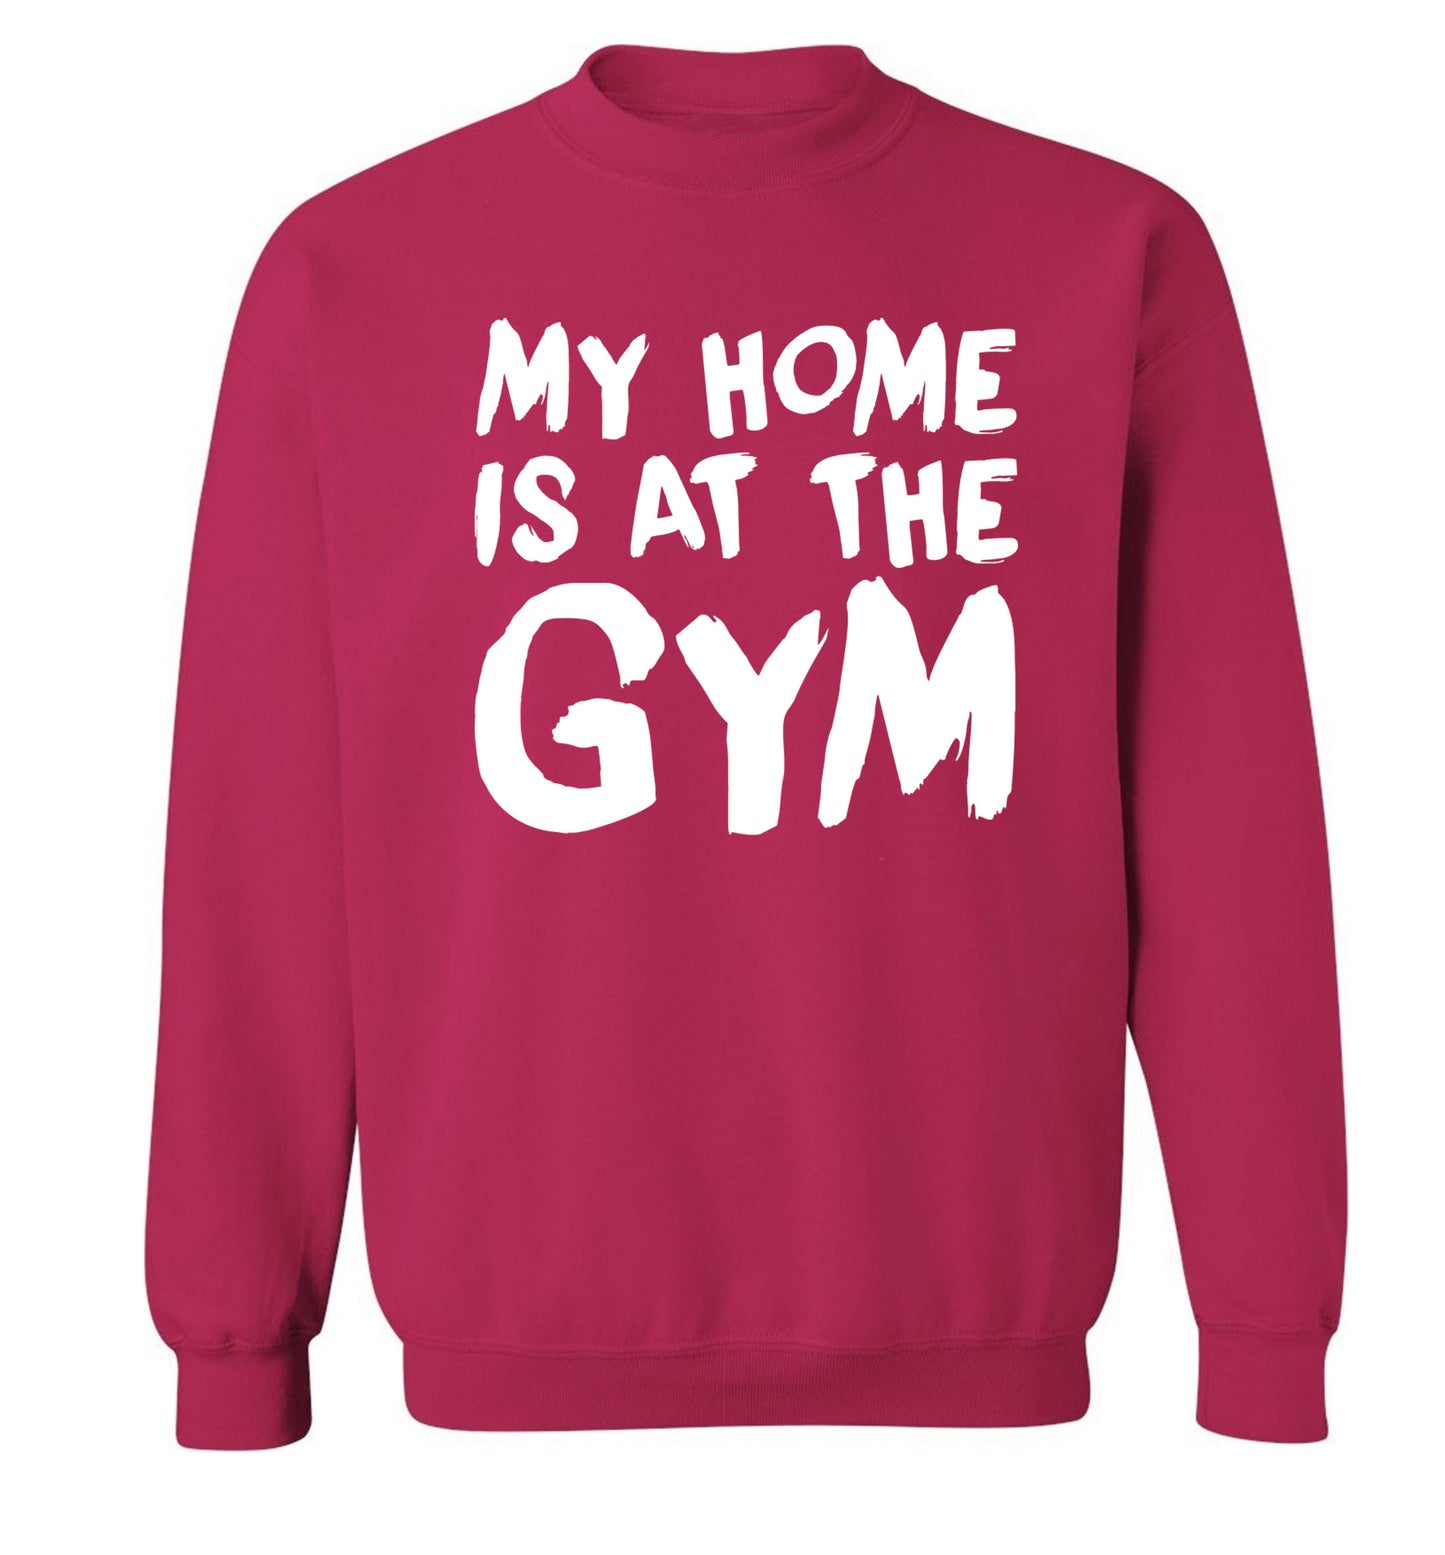 My home is at the gym Adult's unisex pink Sweater 2XL